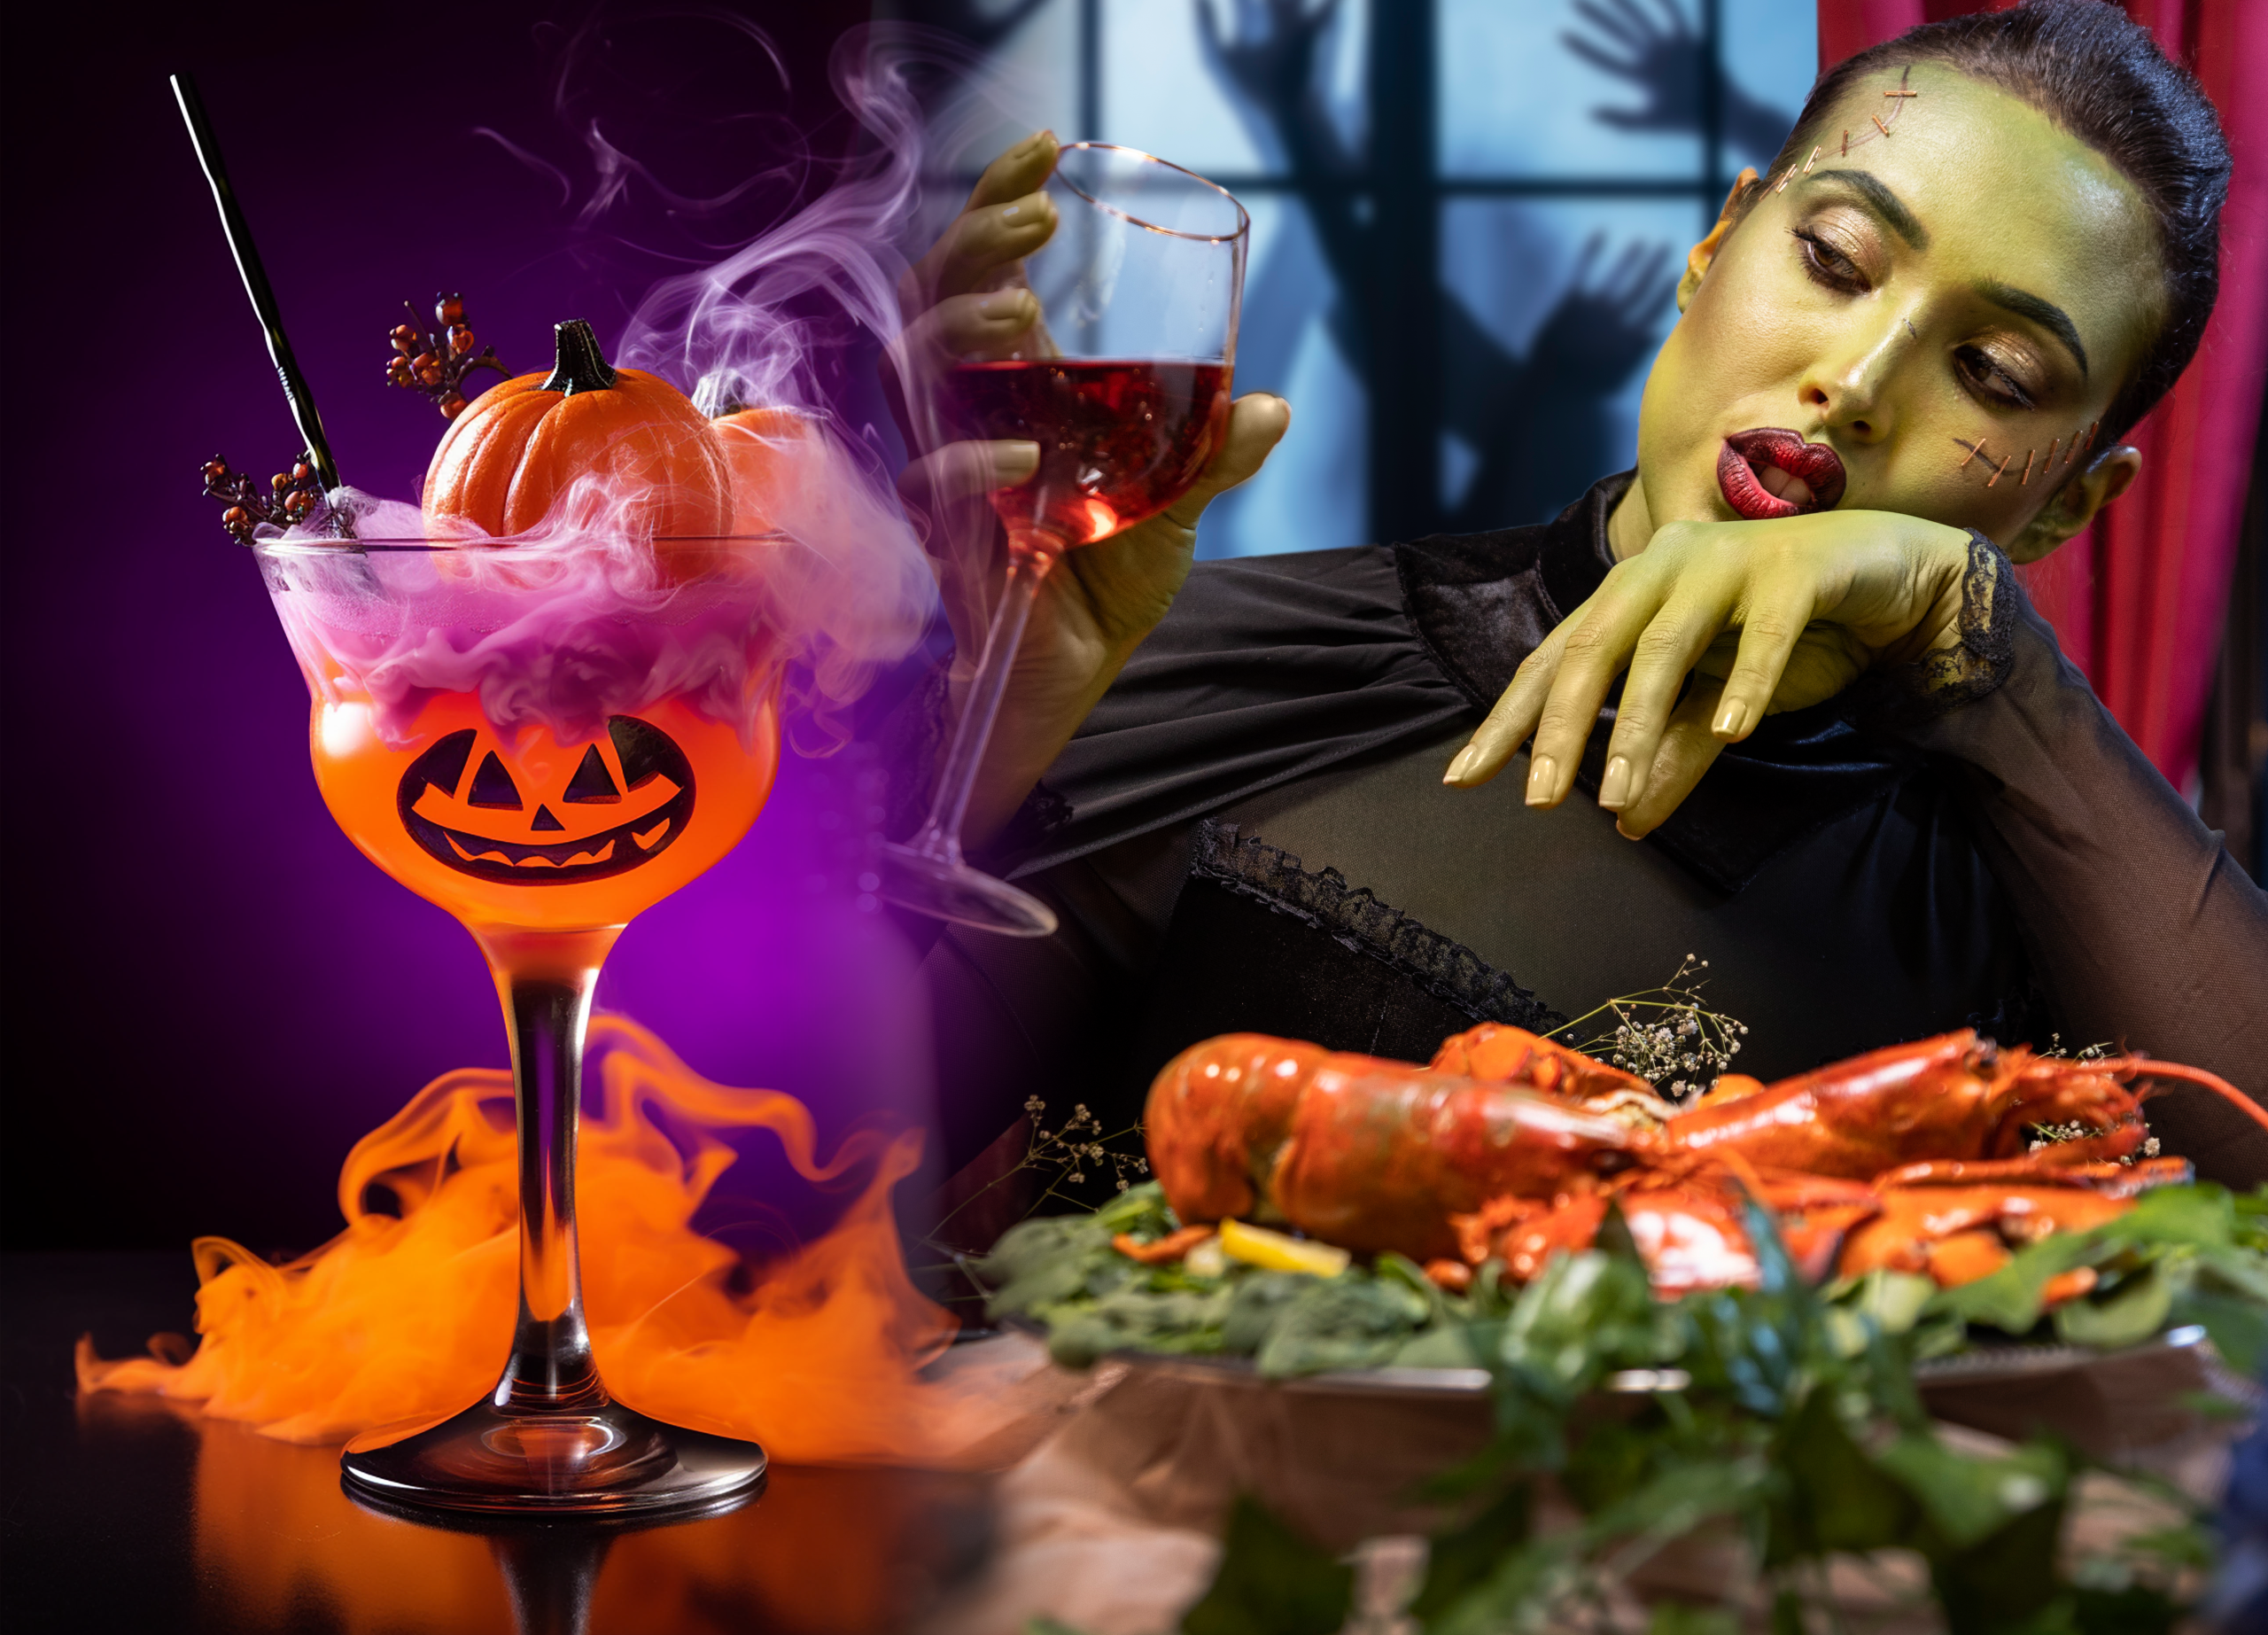 Themed menus and spooky drinks